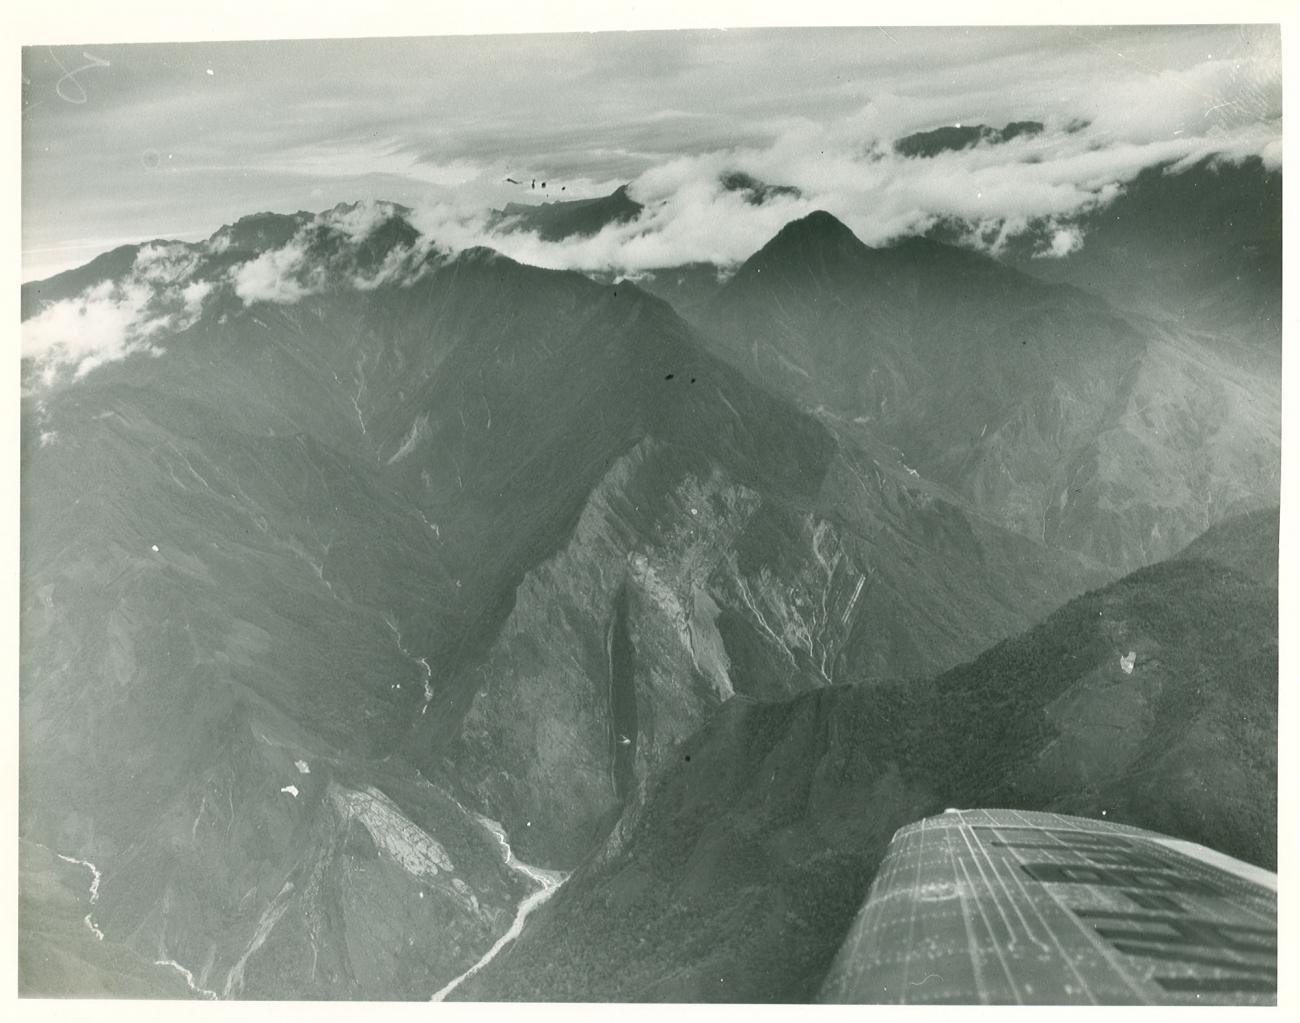 BD/23/6 - 
Aerial photograph of a mountain landscape
